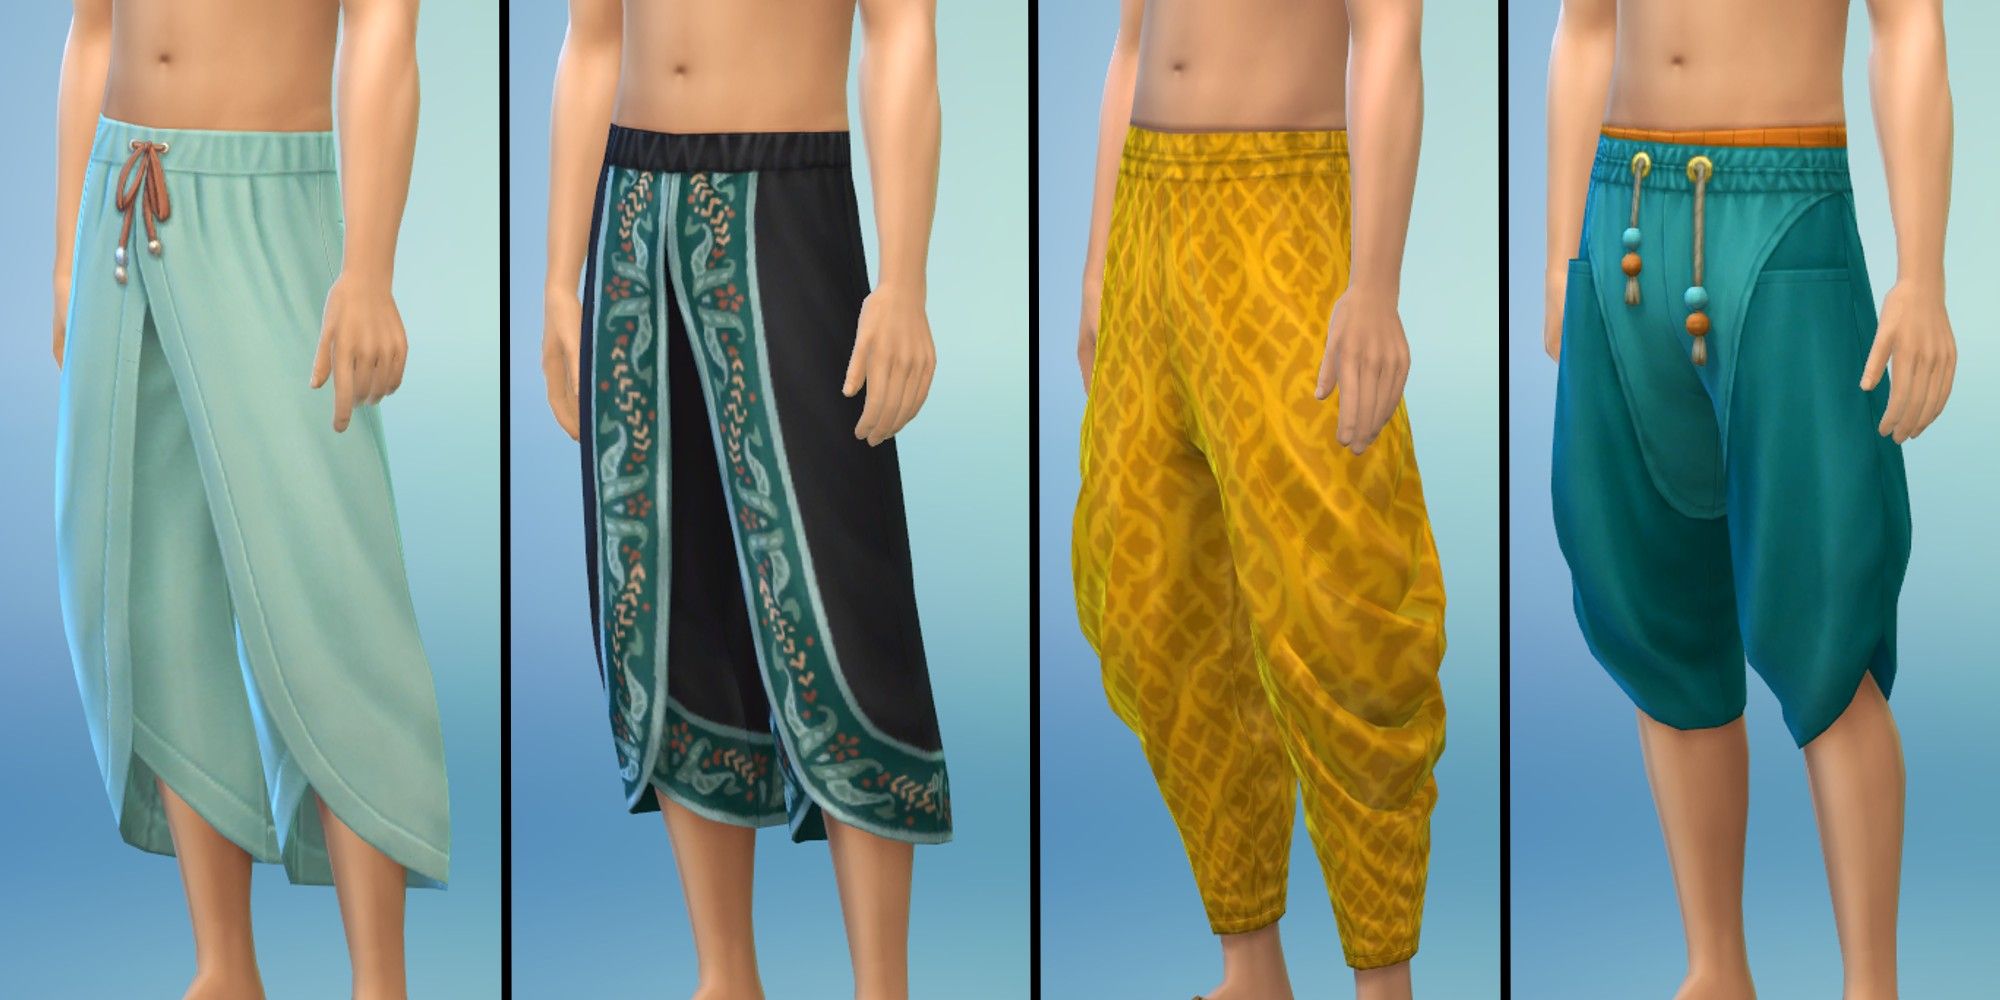 Sims 4: Fashion Steet Kit, Masculine Bottoms with default swatches, in the CAS Screen